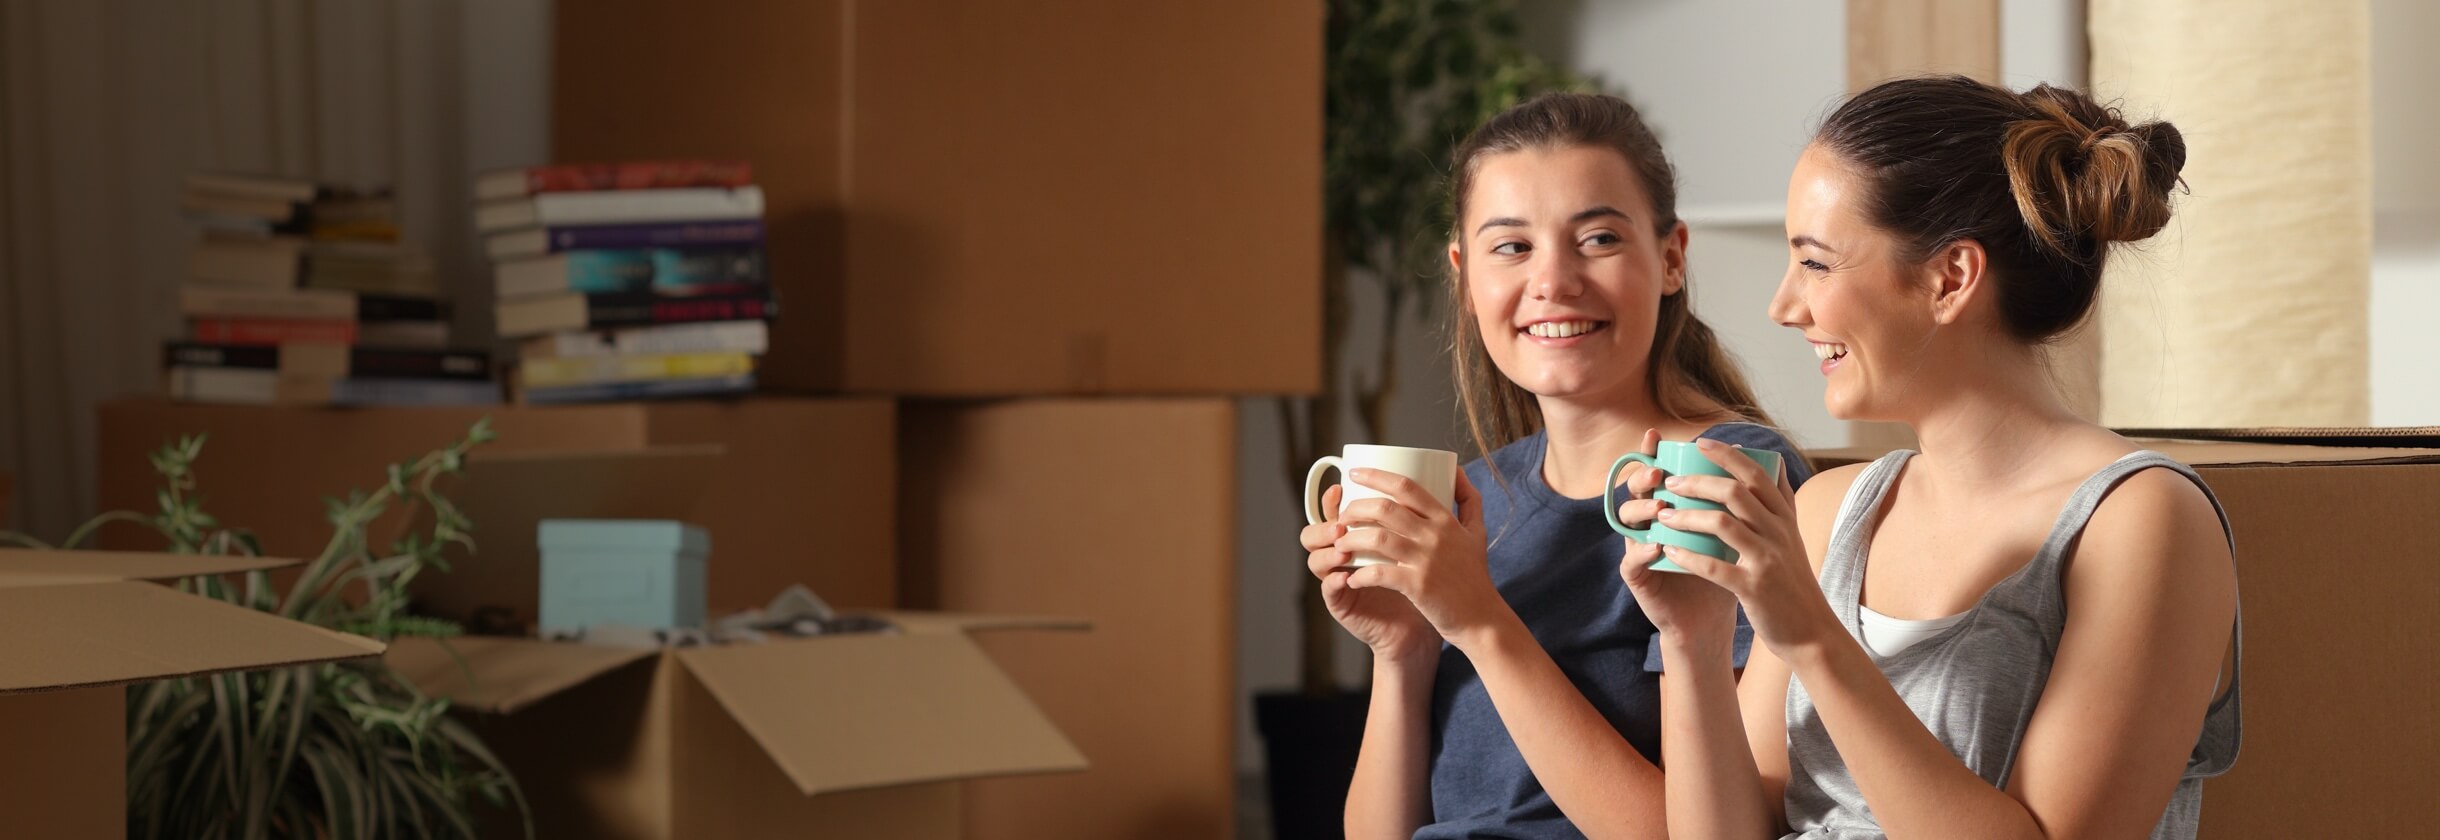 young woman moving and getting a fresh start on life